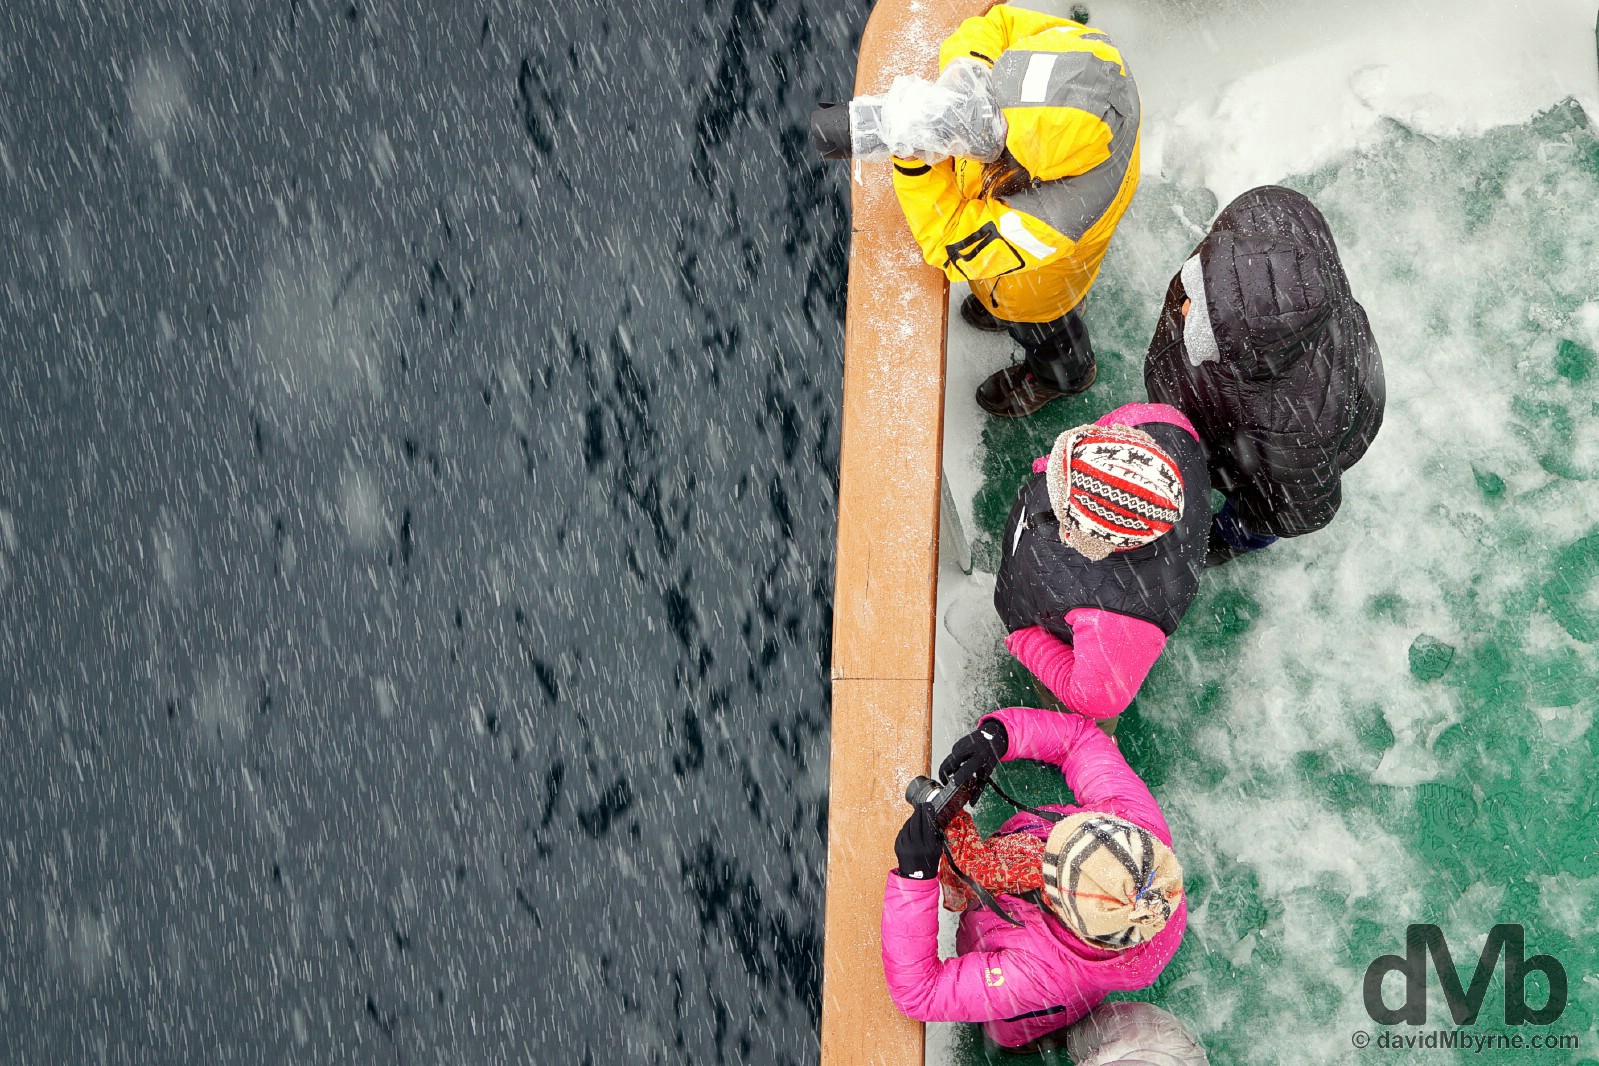 Whale watching in the driving snow off the deck of the M/V Ocean Endeavour in Wilhelmina Bay, Antarctica. December 2, 2015.